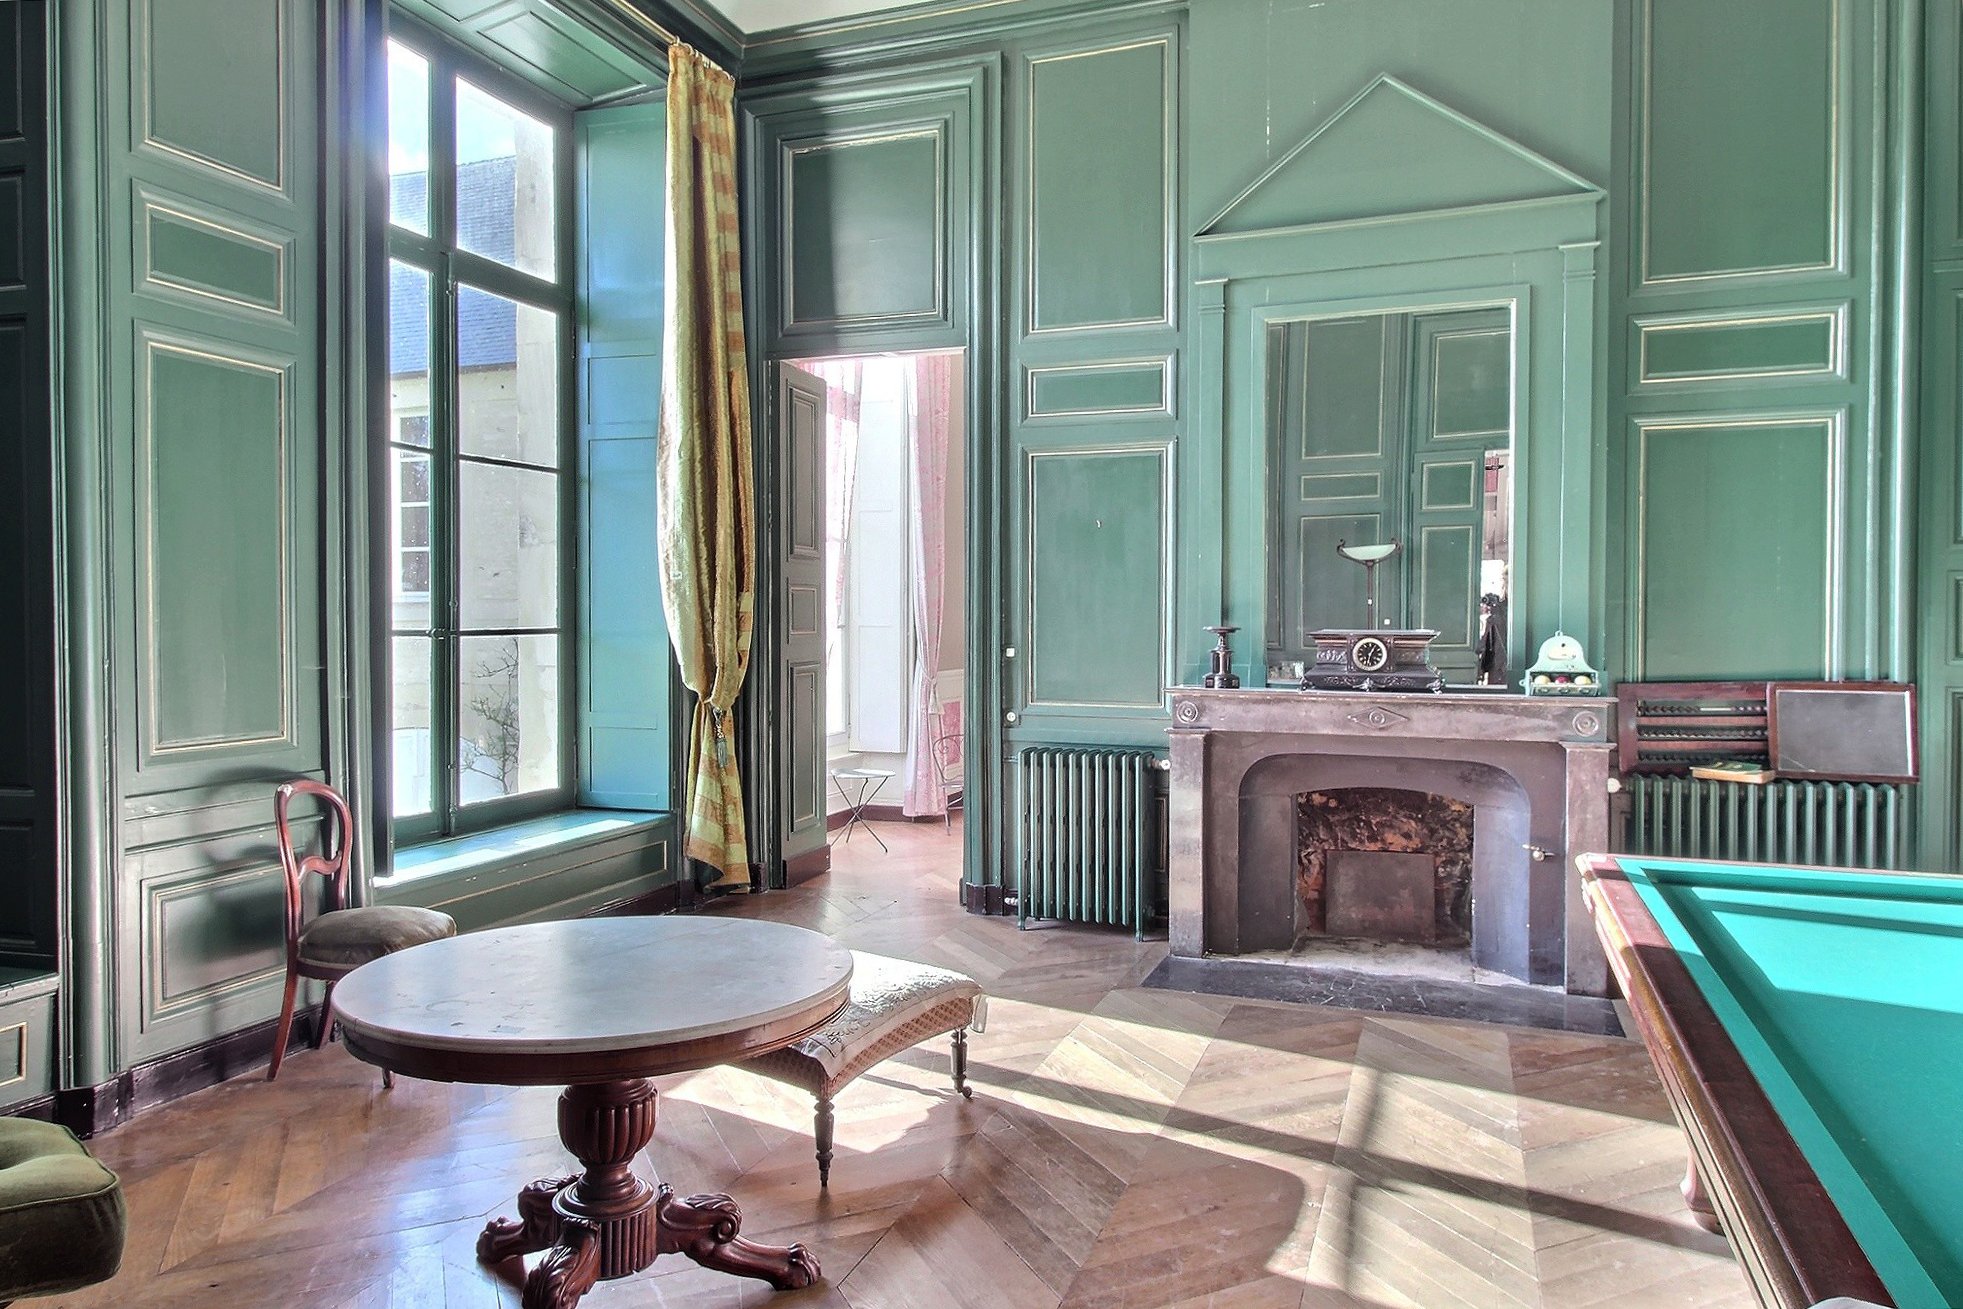 Francis York Renaissance Chateau in Normandy, France Listed for €1.5M  15.jpg